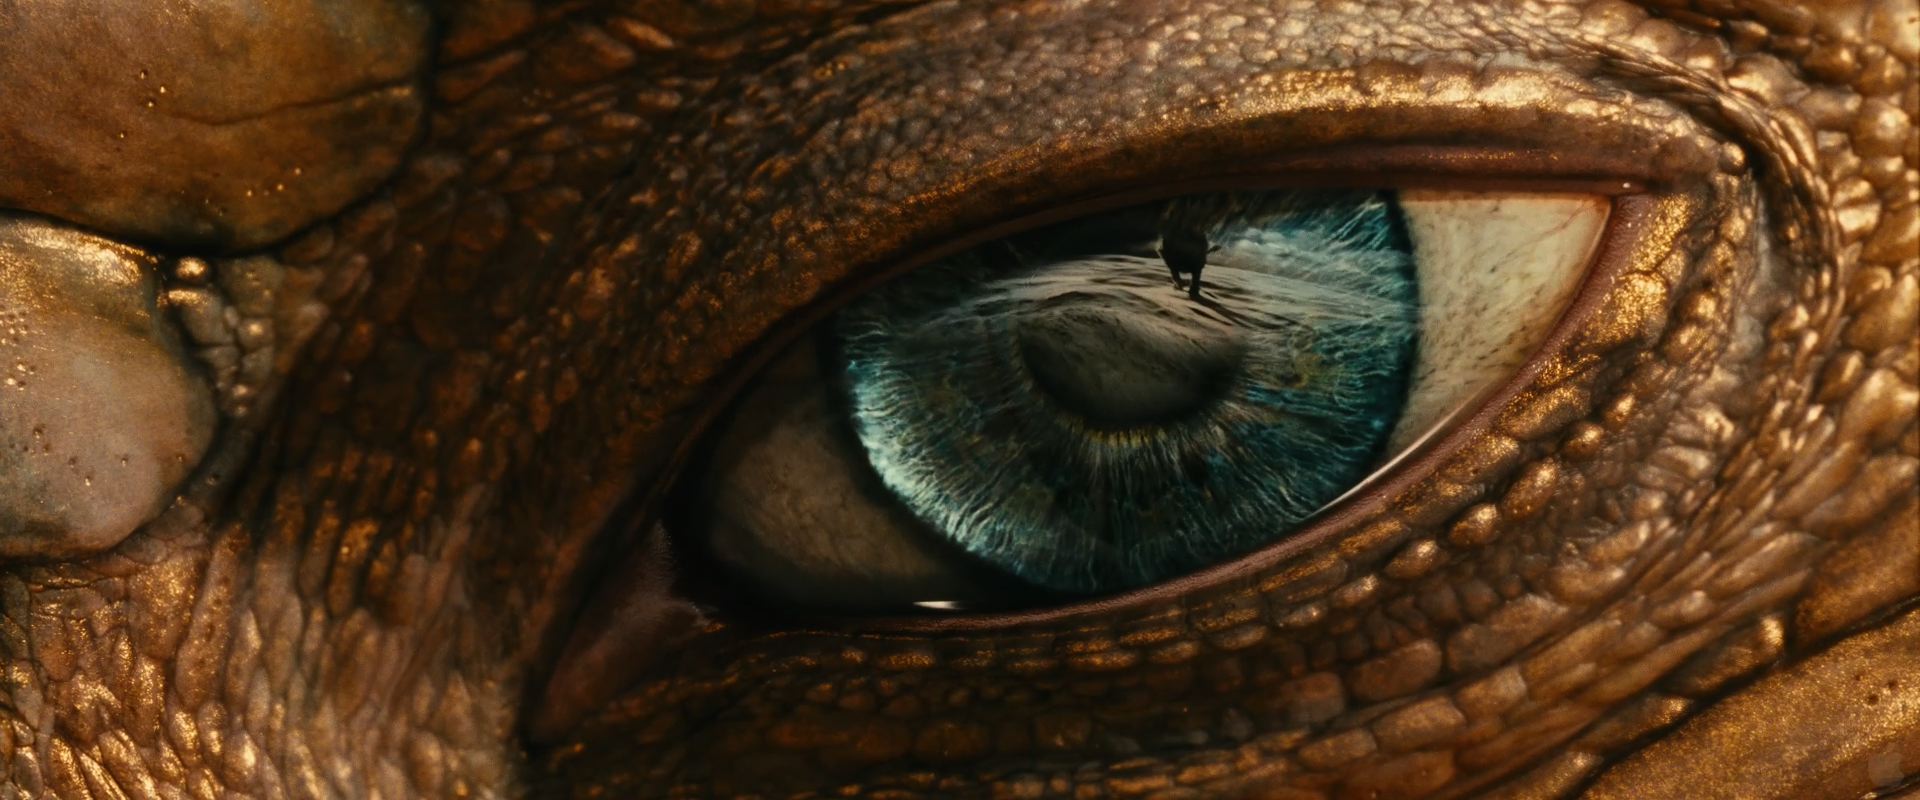 Eye Of The Dragon From Chronicles Narnia Voyage